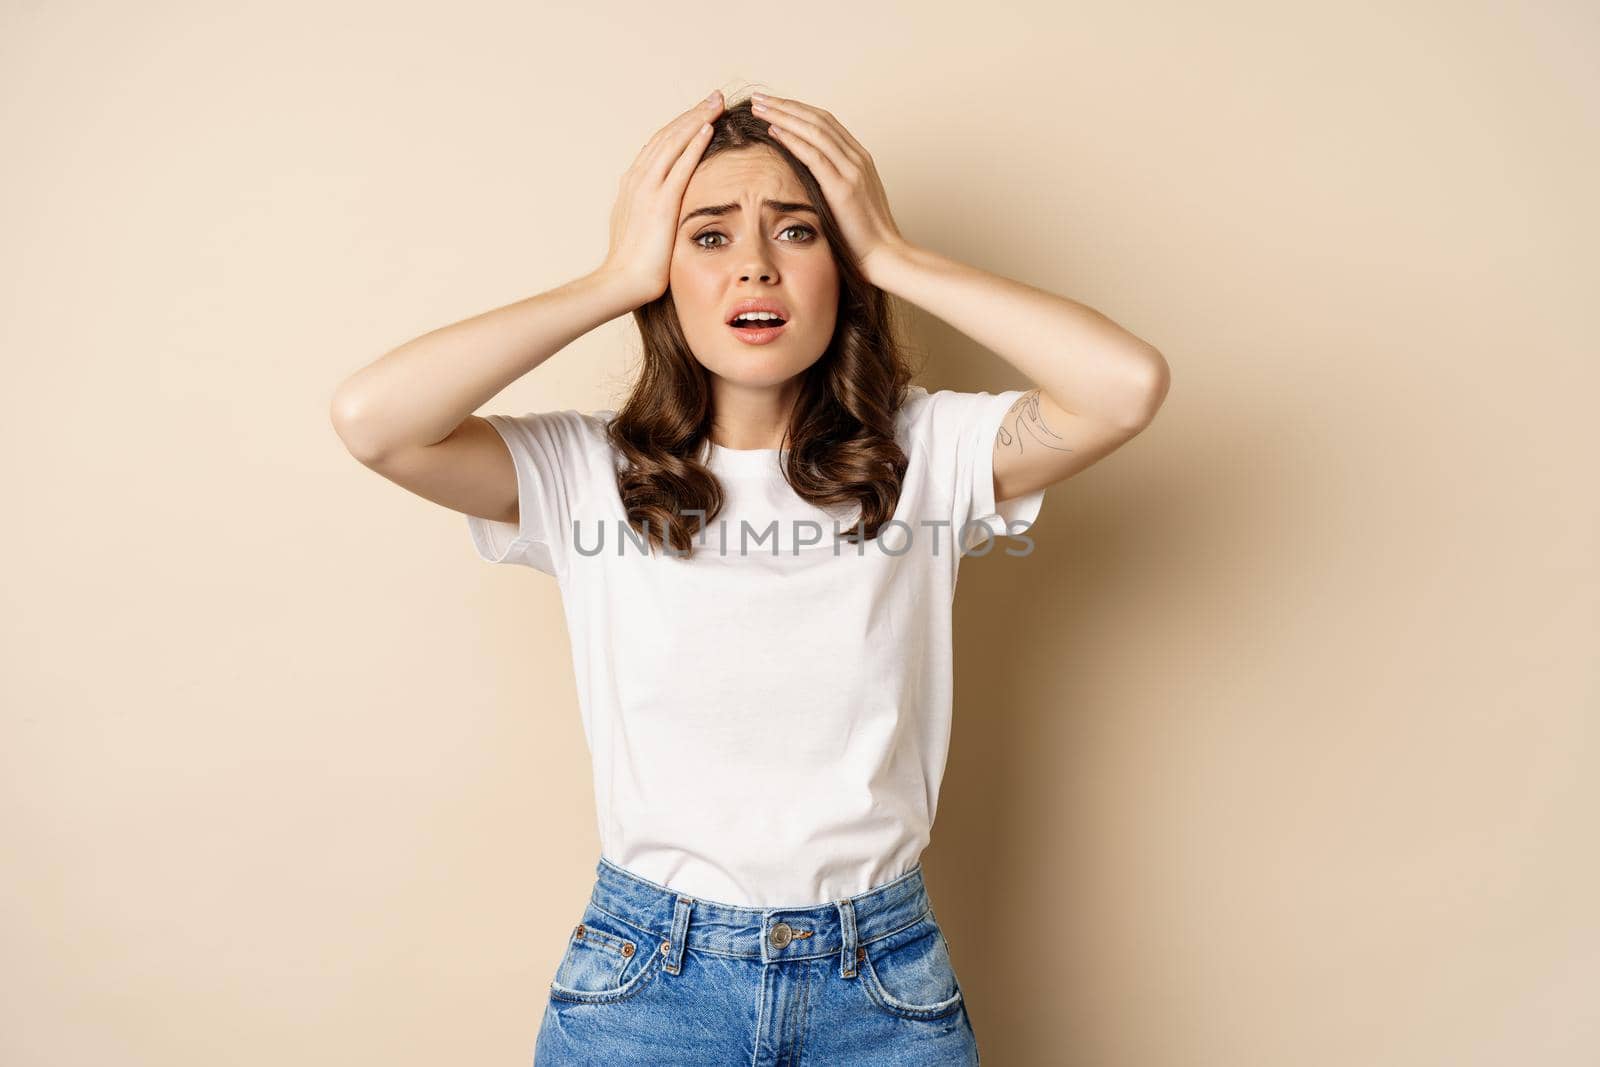 Young woman facing disaster, looking anxious in panic, holding hands on head frustrated, standing over beige background.